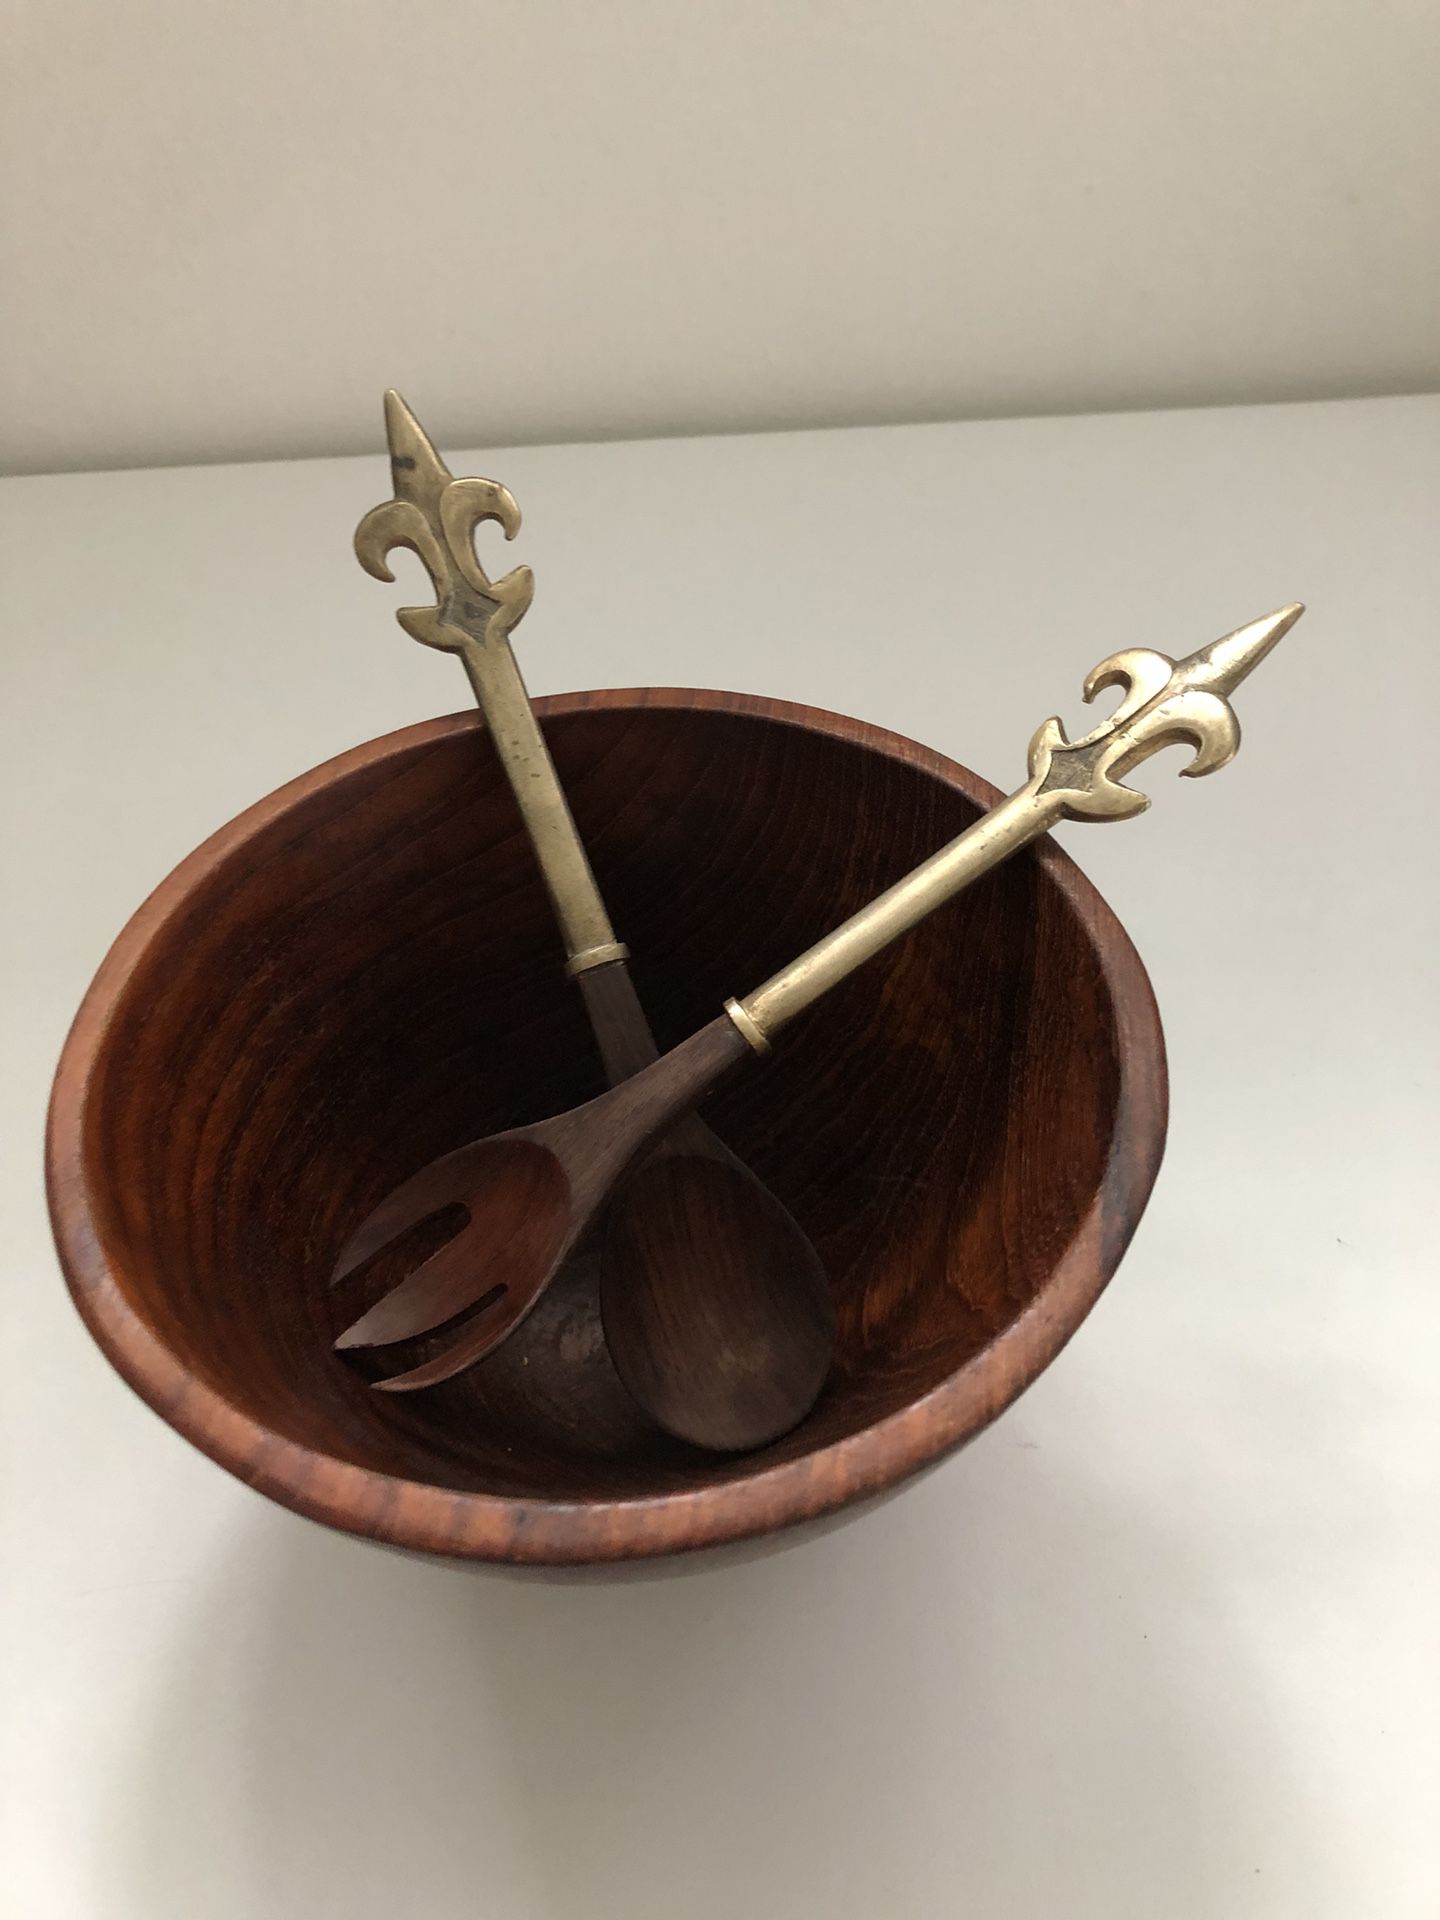 Vintage Wooden Bowl With Serving Spoon And Fork